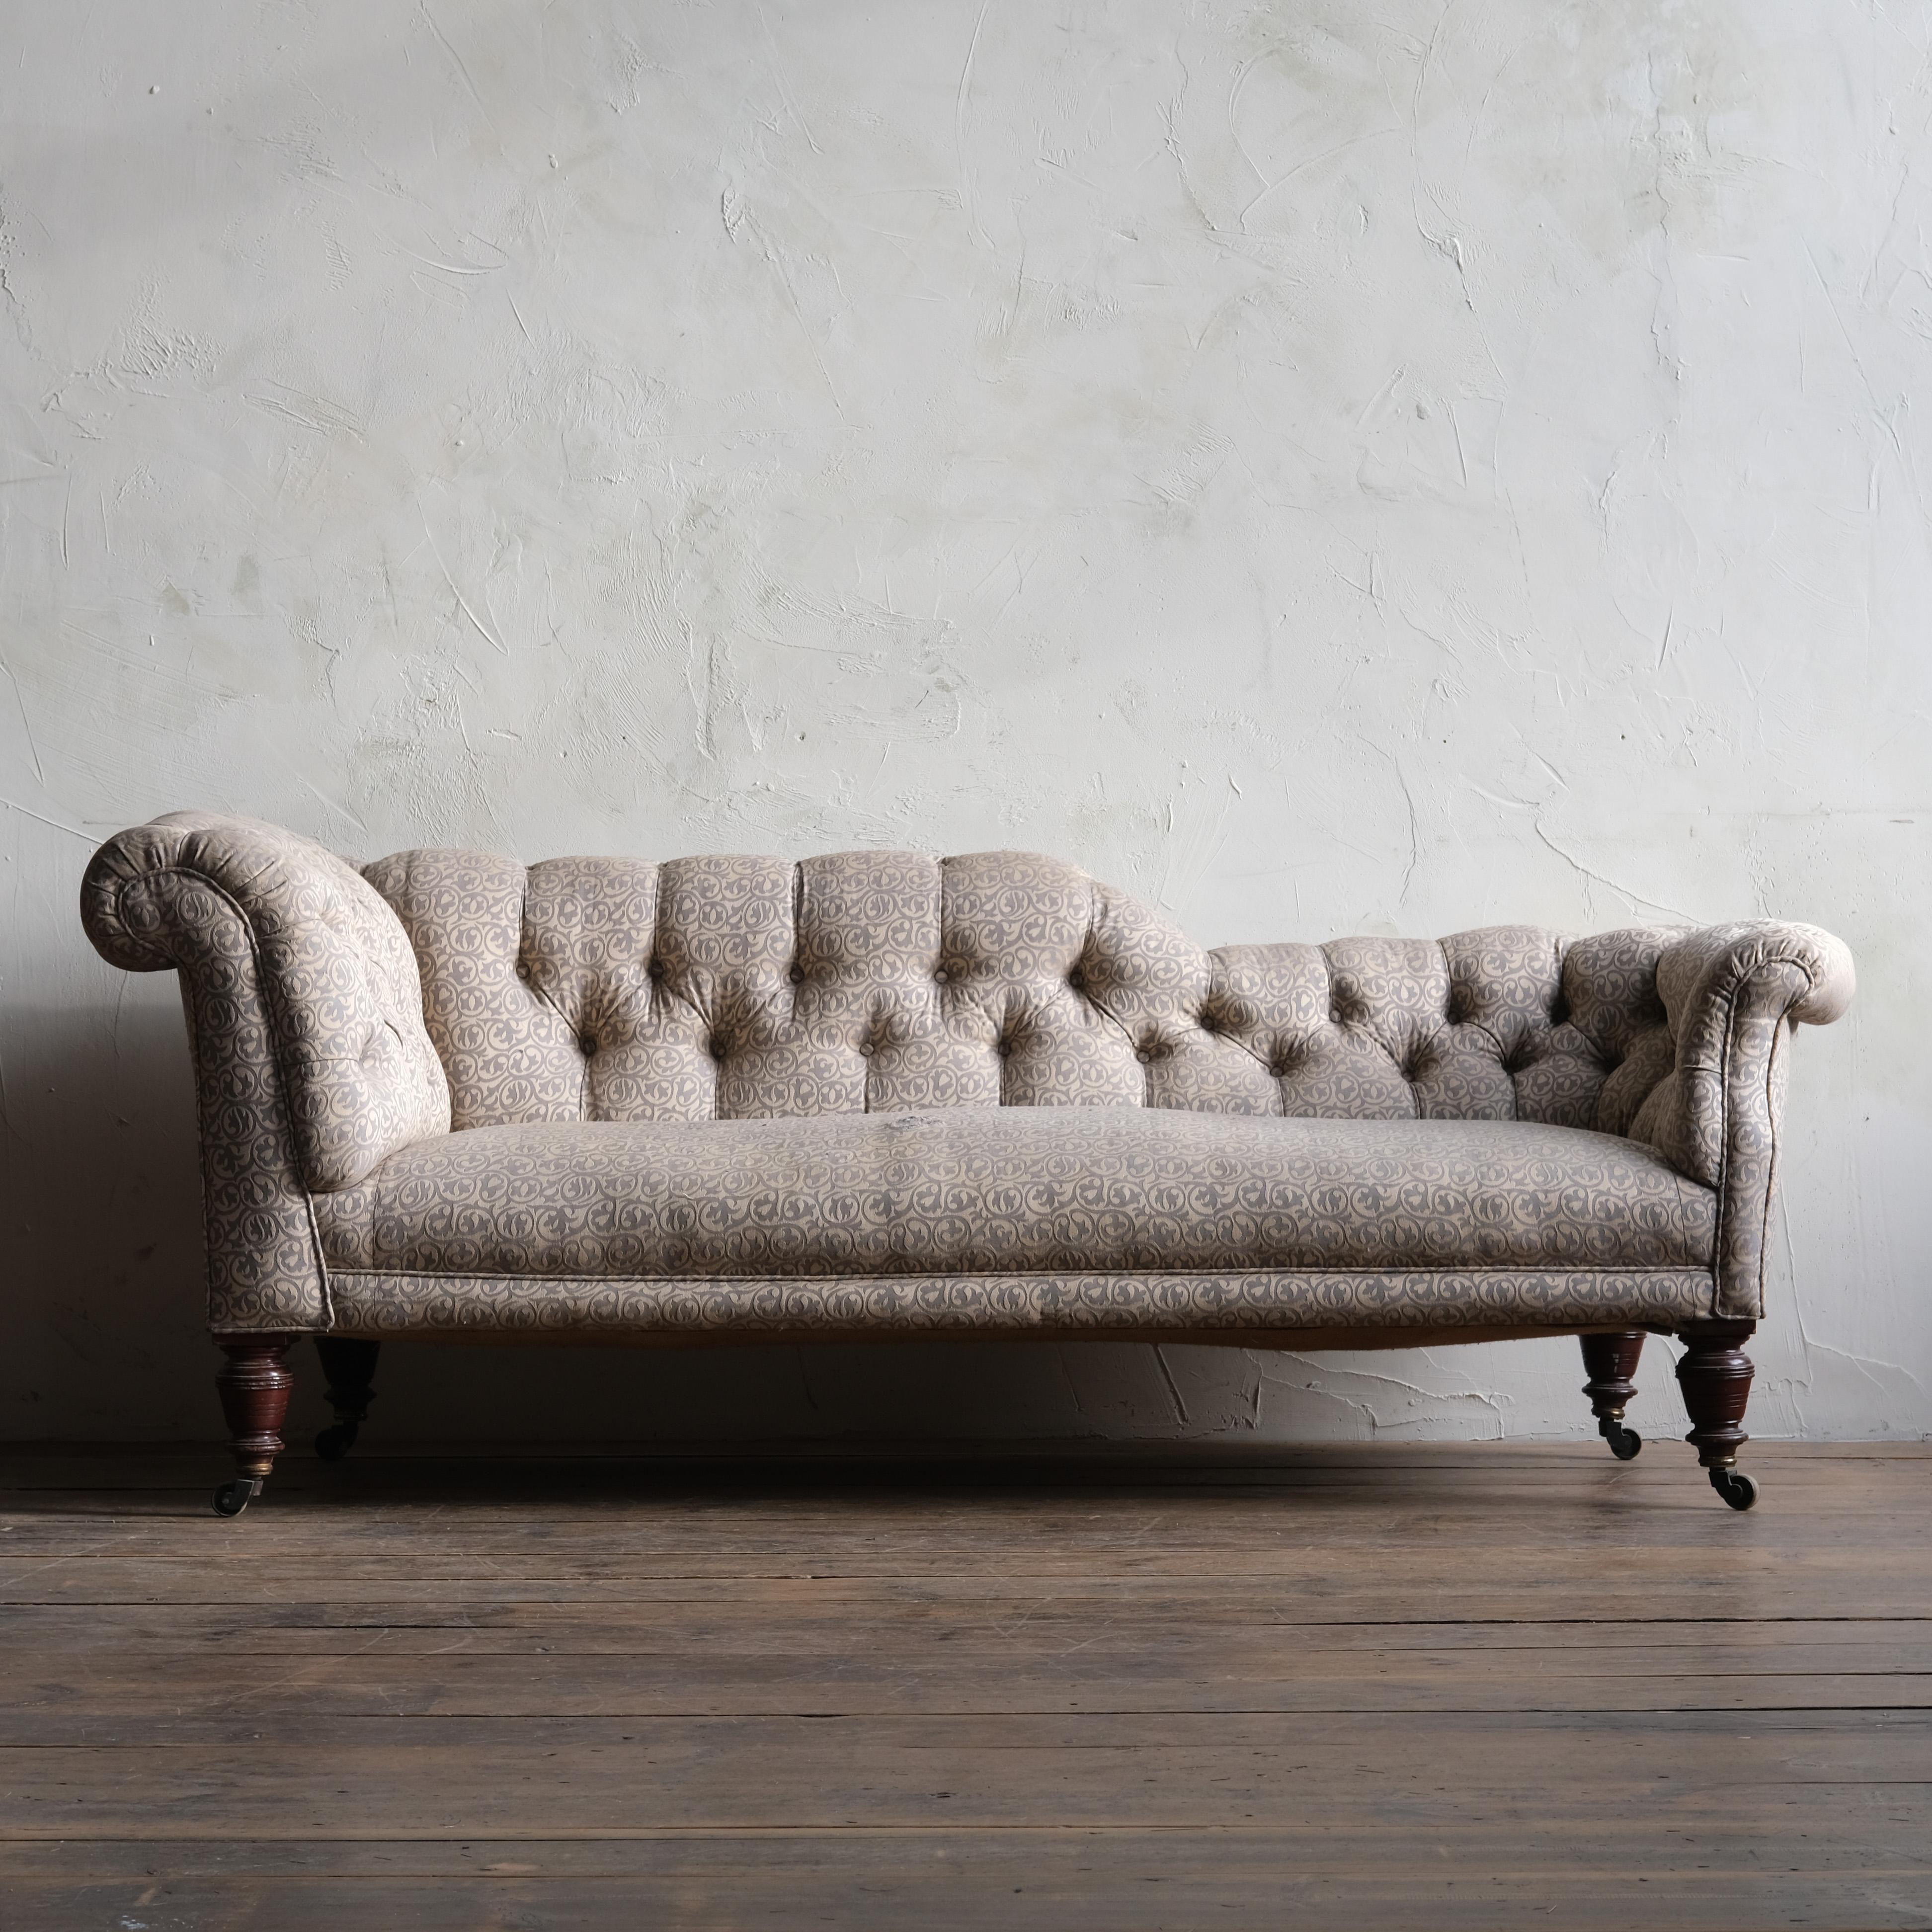 A 19th Century Chesterfield sofa / chaise lounge by Hampton & Sons of Pall Mall - London. Raised on 4 turned mahogany legs legs with the original stamped brass casters.

For upholstery.